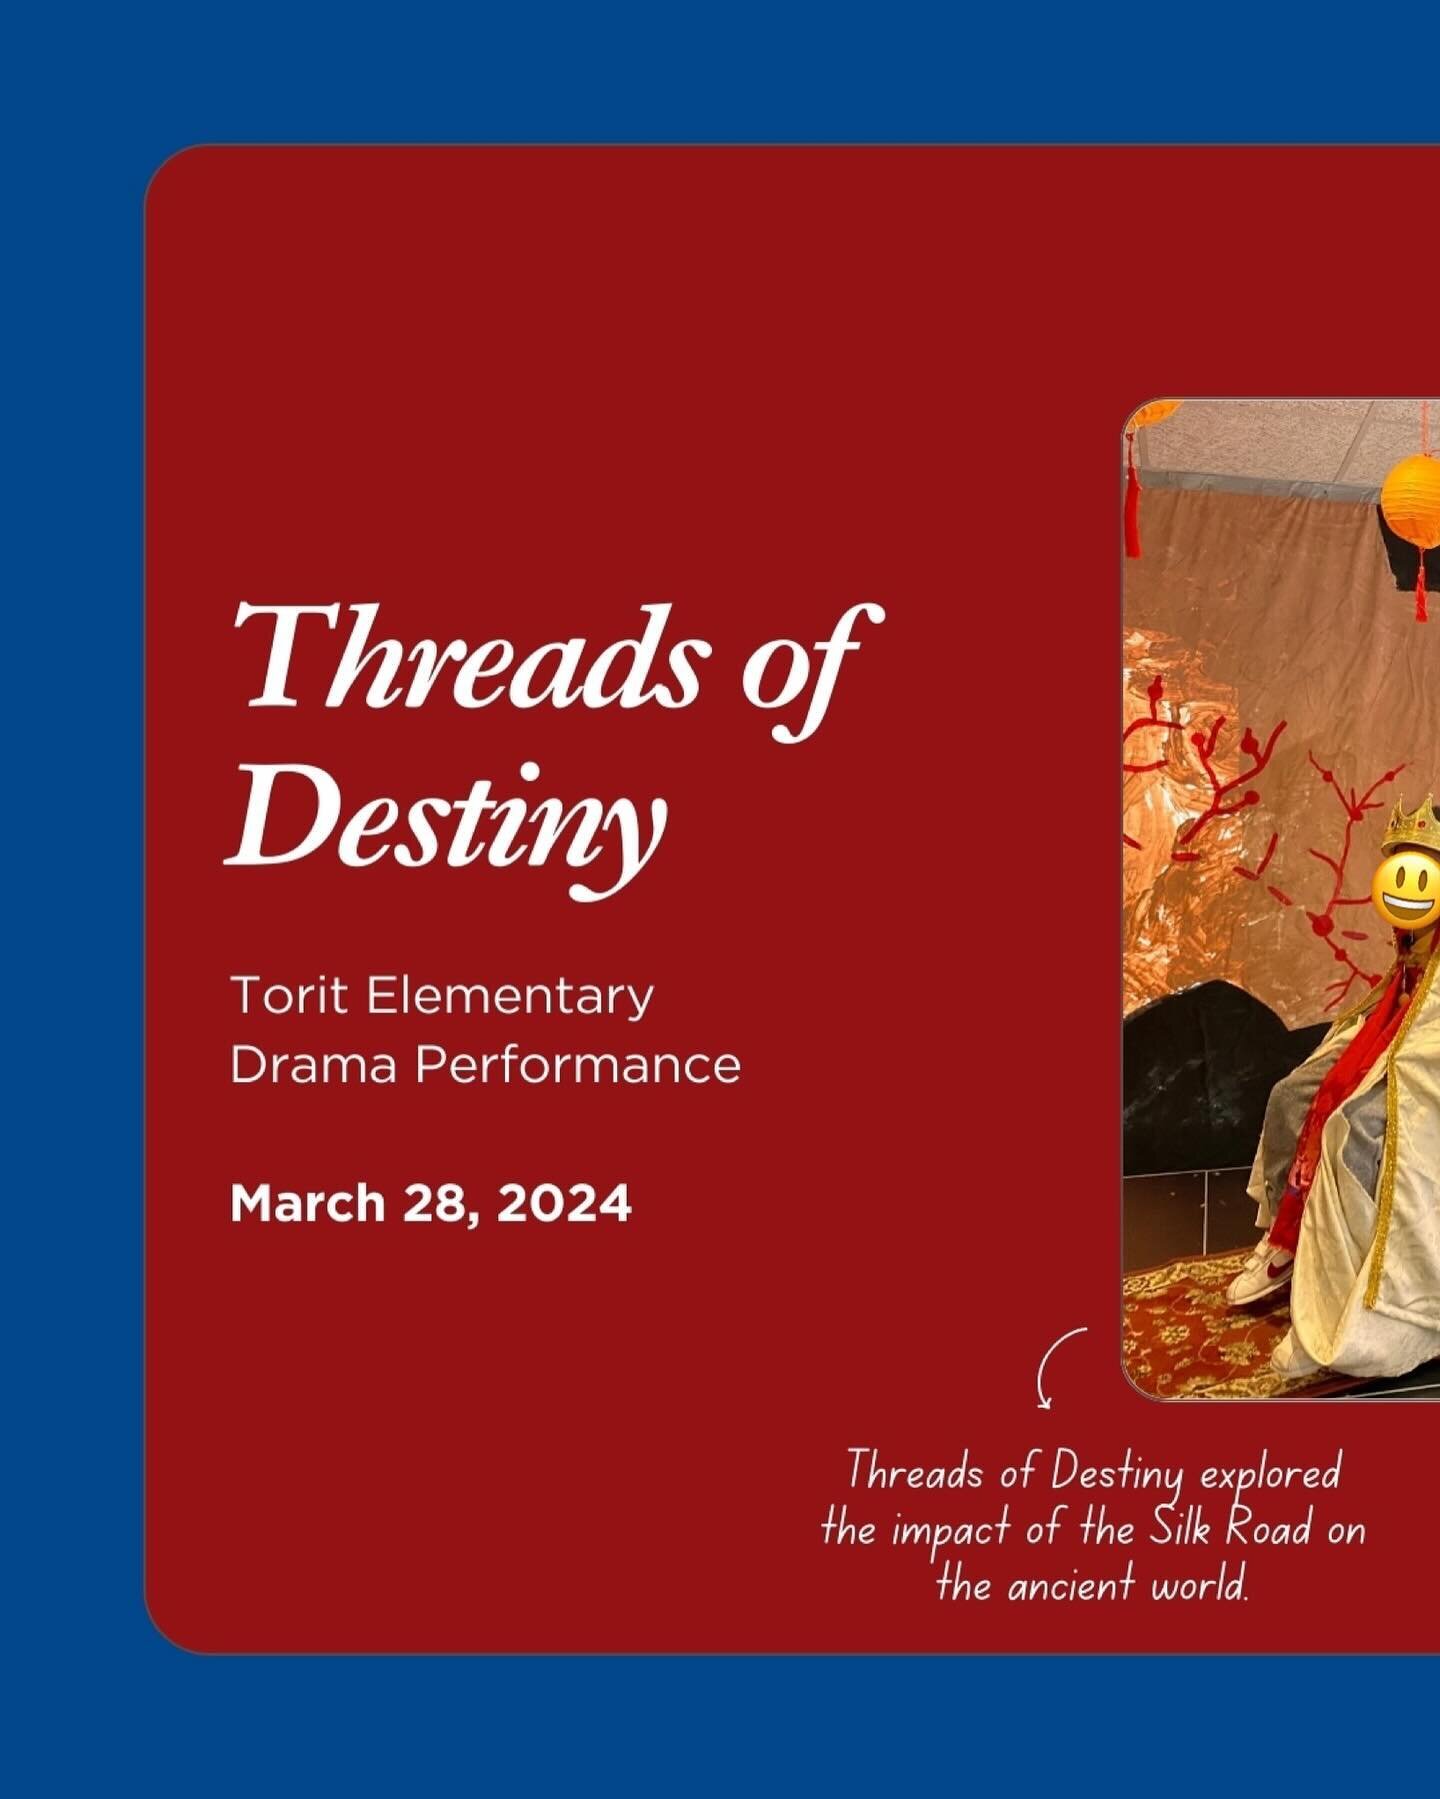 🎭🌏 Our elementary school play, &ldquo;Threads of Destiny,&rdquo; took us on a captivating journey through the Silk Road&rsquo;s rich history! From Ancient China&rsquo;s Han Dynasty to the Roman, Byzantine, and Ottoman Empires, students explored the